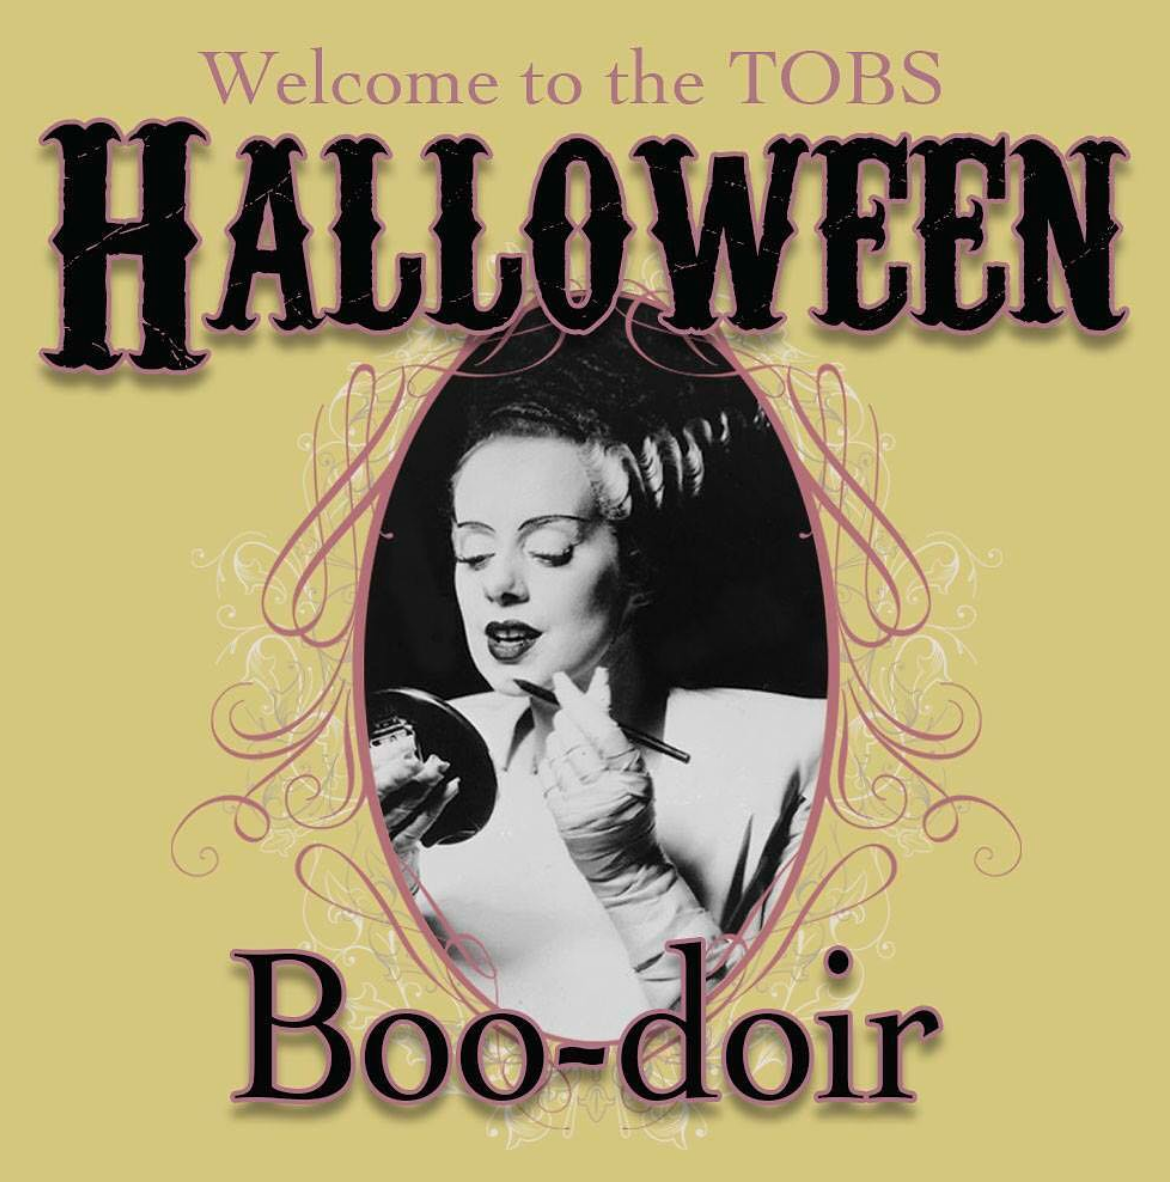 The TOBS Halloween Boo-doir is now open! - The Oblong Box Shop